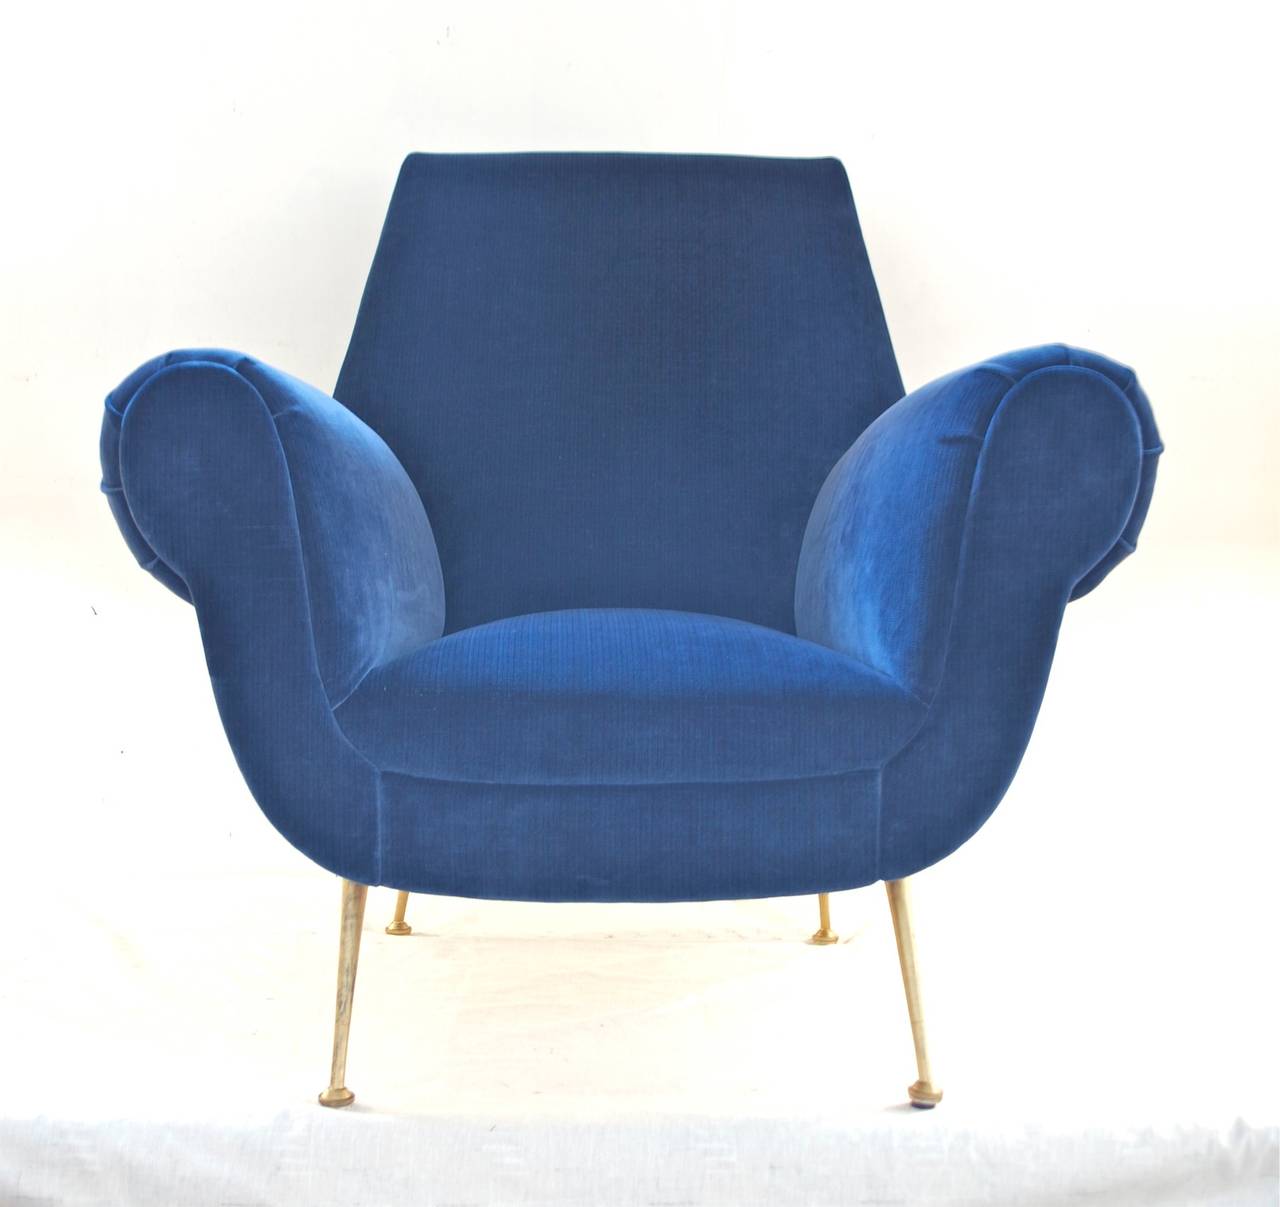 Sculptural Italian lounge chair attributed to Gigi Radice. The chair is dressed in a luxurious 100% cotton stried velvet of vibrant blue. Gilt metal legs provide steady support of the frame and complete the stunning look that this chair does possess.